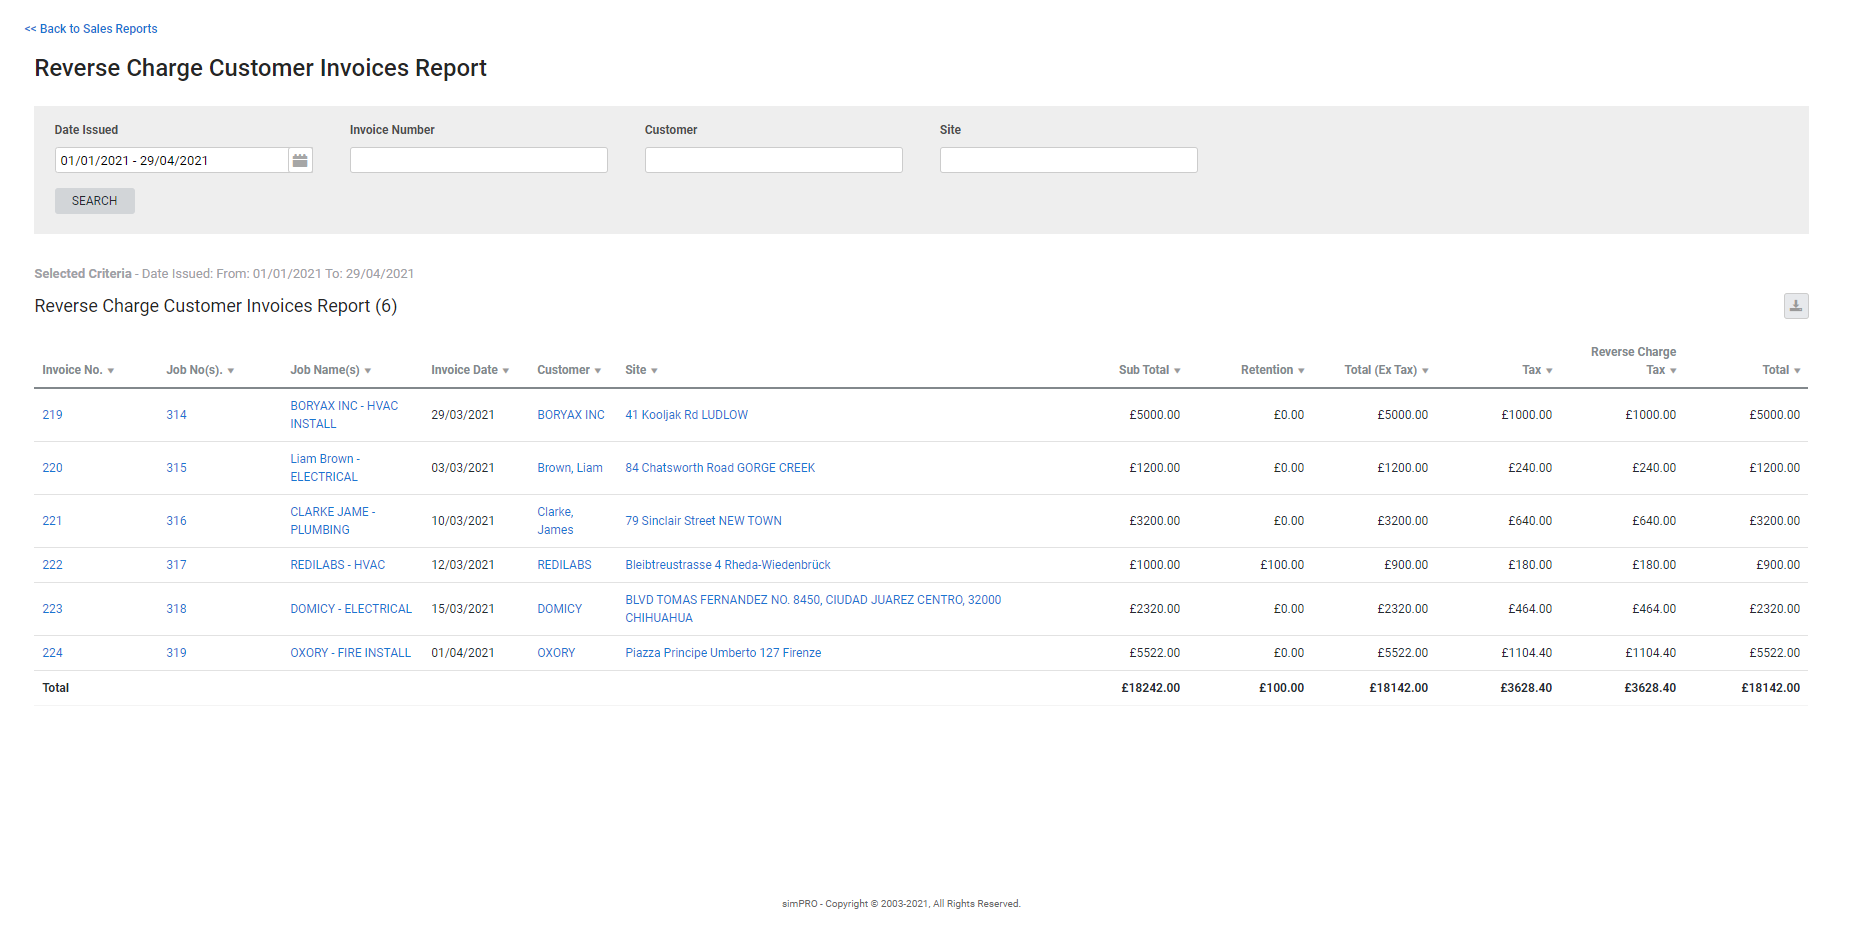 A screenshot of the Reverse Charge Customer Invoices report.